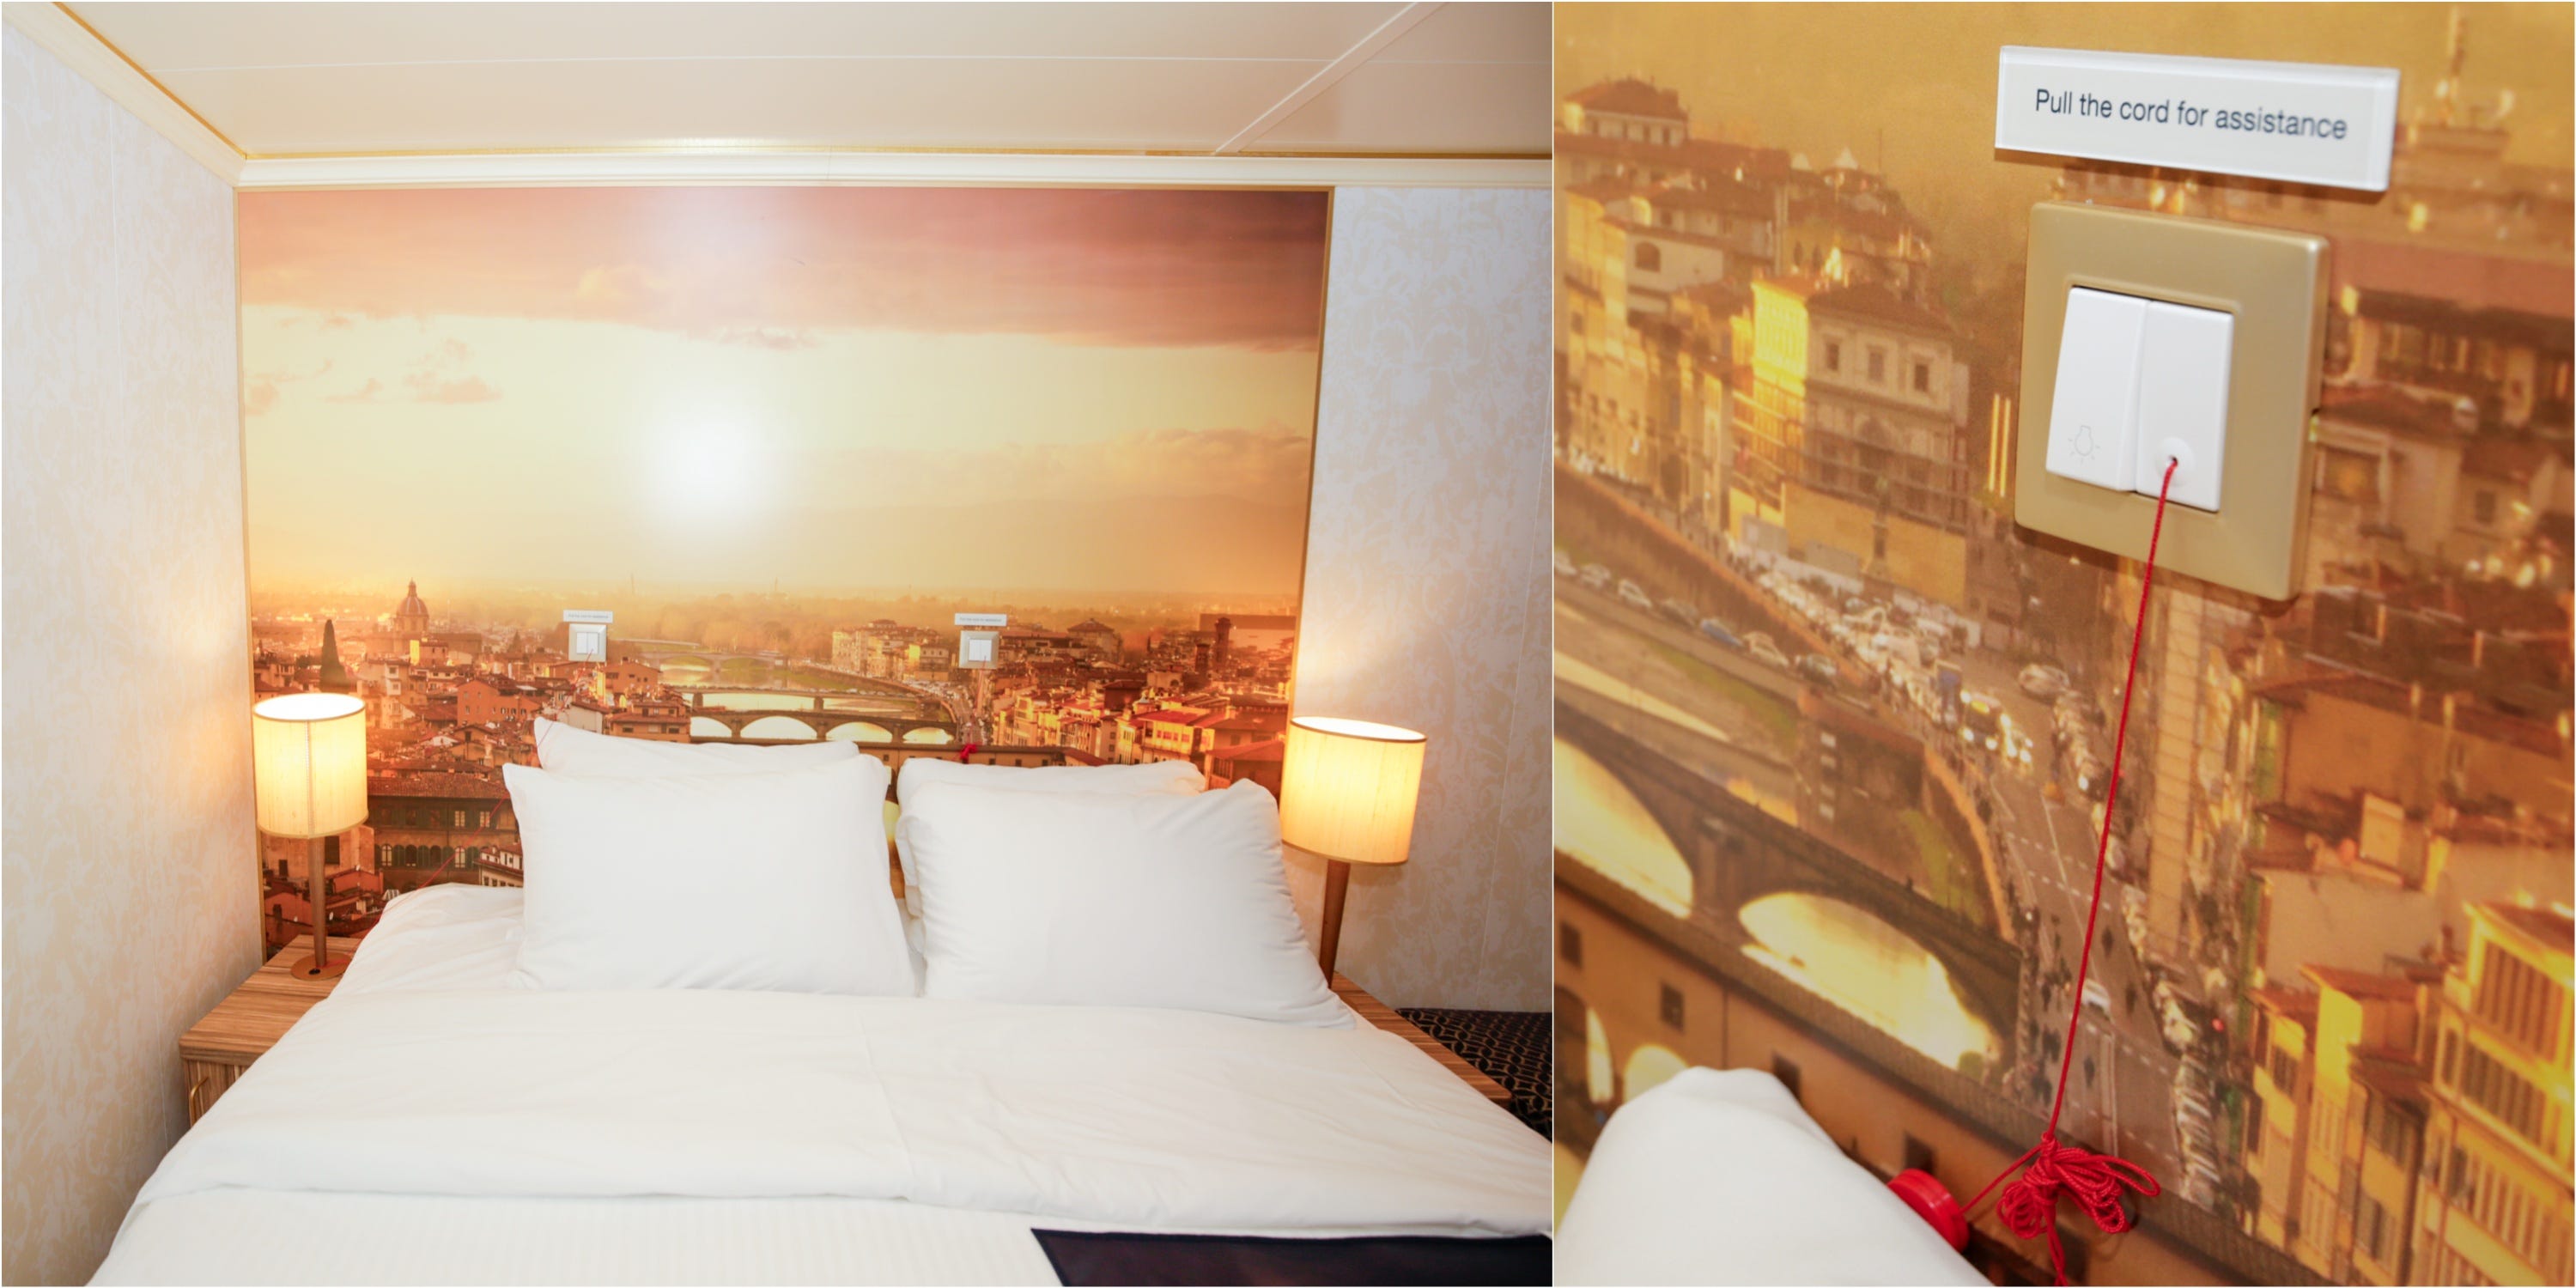 <p>That would explain the otherwise unnecessary photo of Florence, Italy behind my bed.</p><p>The print was both the only decor and the only reference to Italy in my dingy cabin. Unfortunately, it looked both tacky and misplaced.</p><p>It did, however, disguise the ominous "pull the cord for assistance" feature.</p>